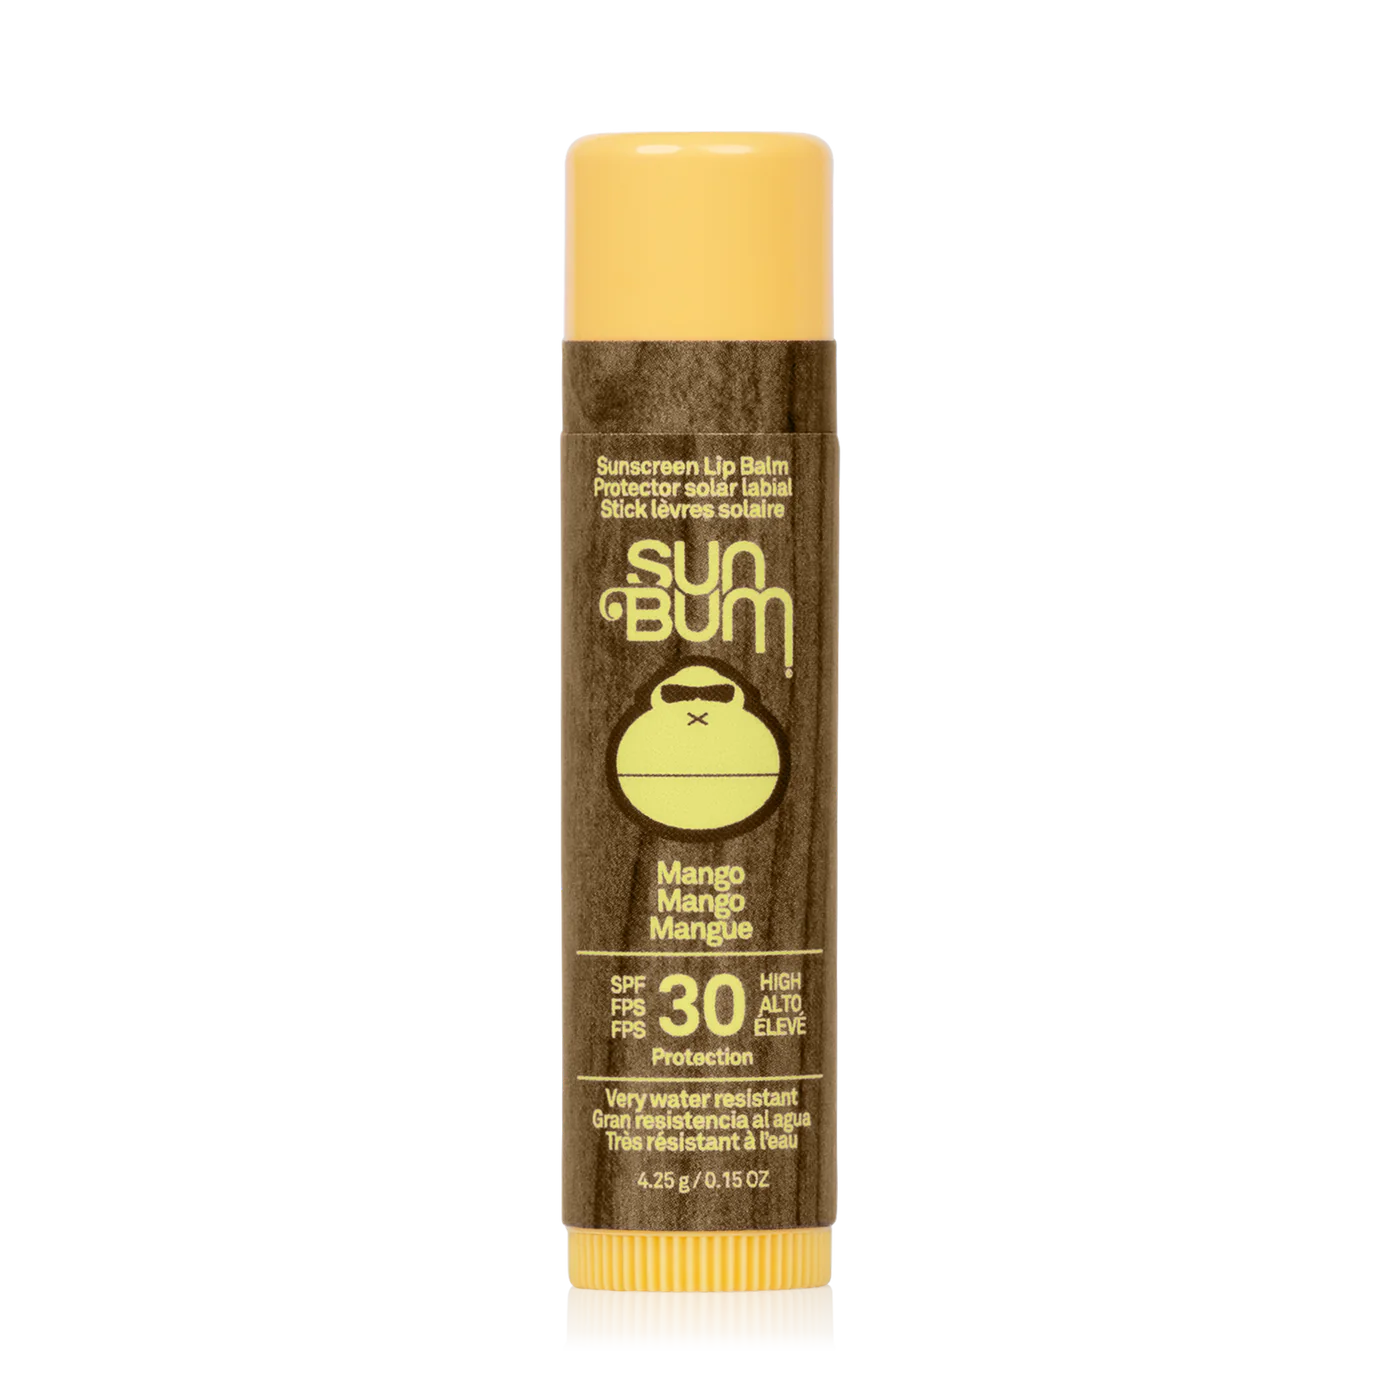 Lip balm container with a yellow top and bottom, wood grain centre, along with the sun bum wordmark and mascot